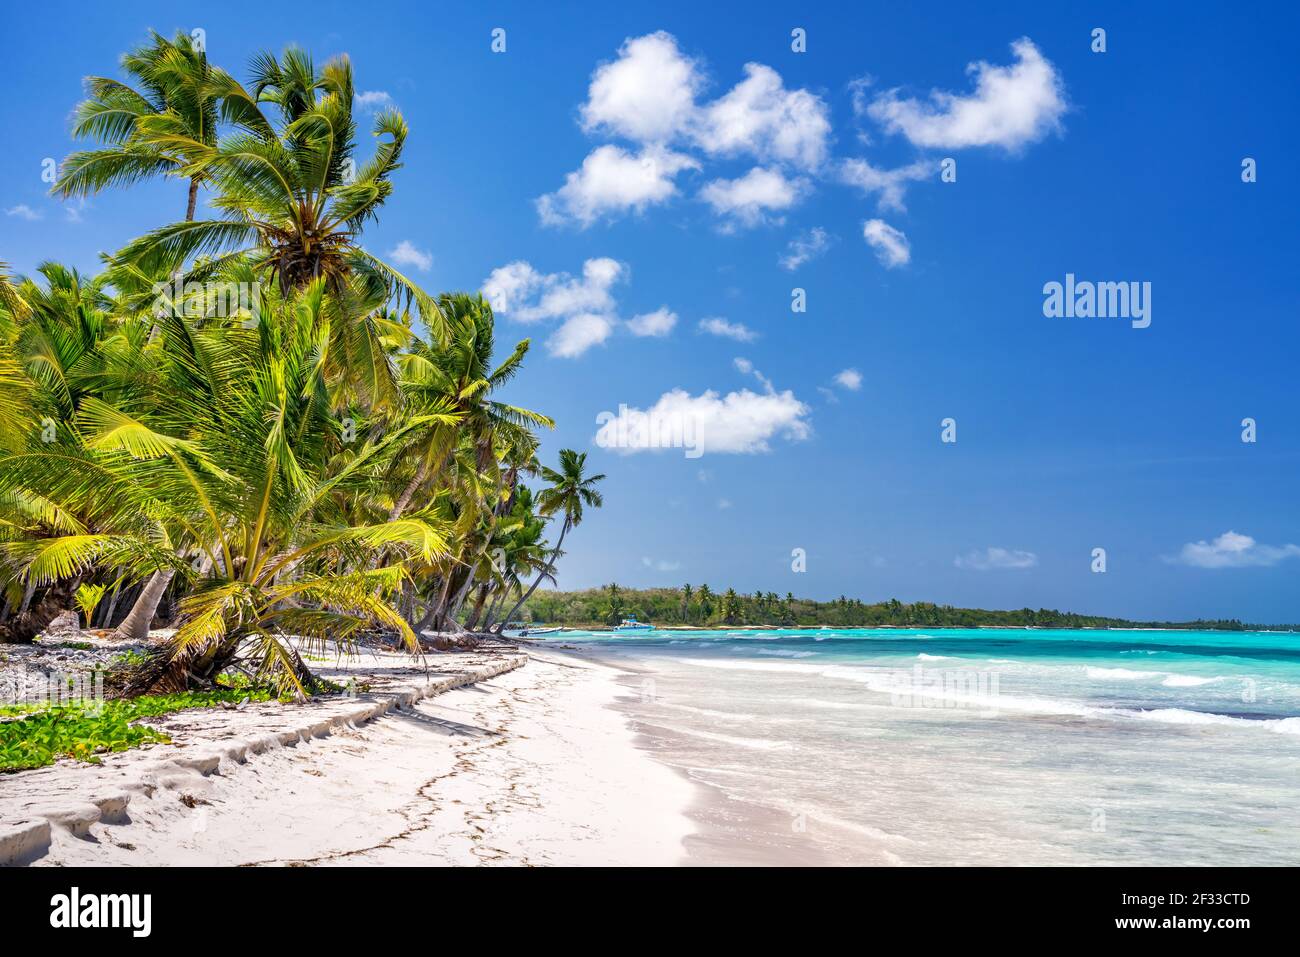 Palm trees on beautiful tropical sunny beach in Dominican republic Stock Photo